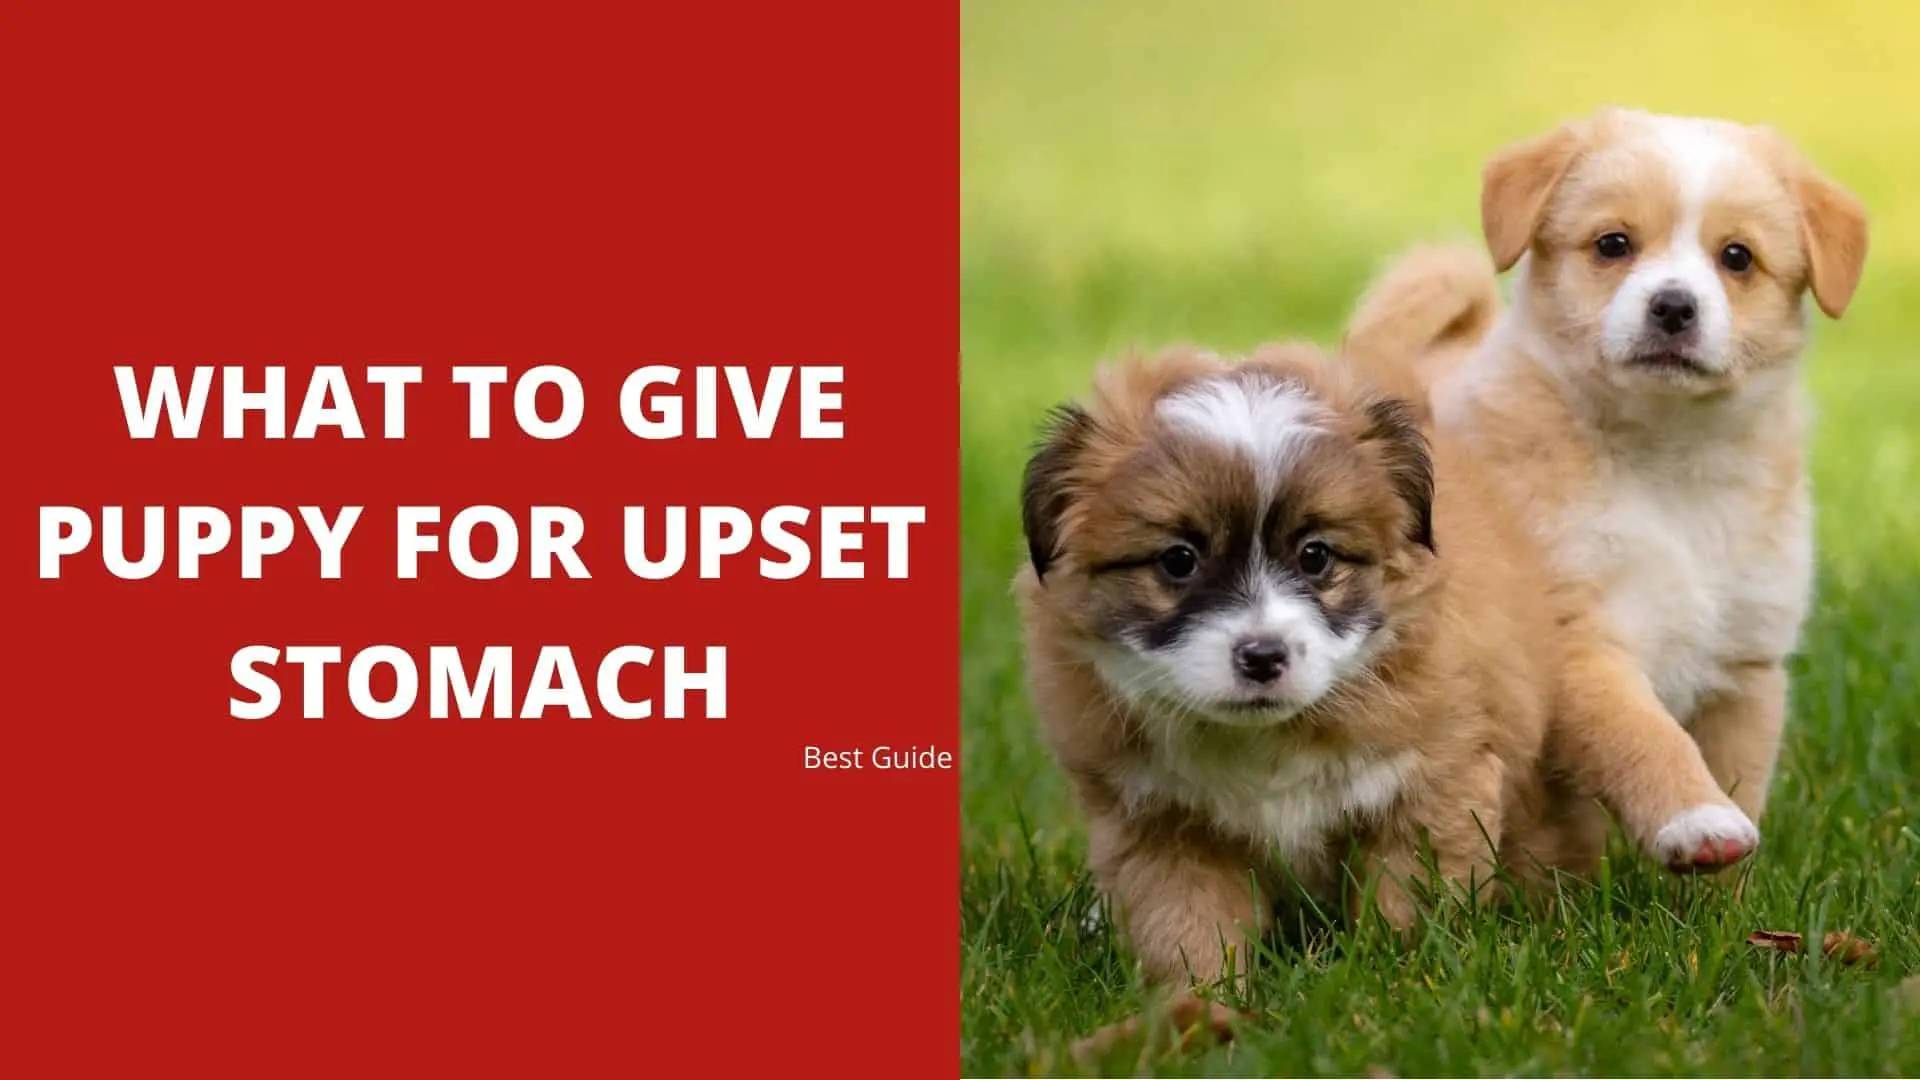 What to Give Puppy for Upset Stomach – Best Guide 2022